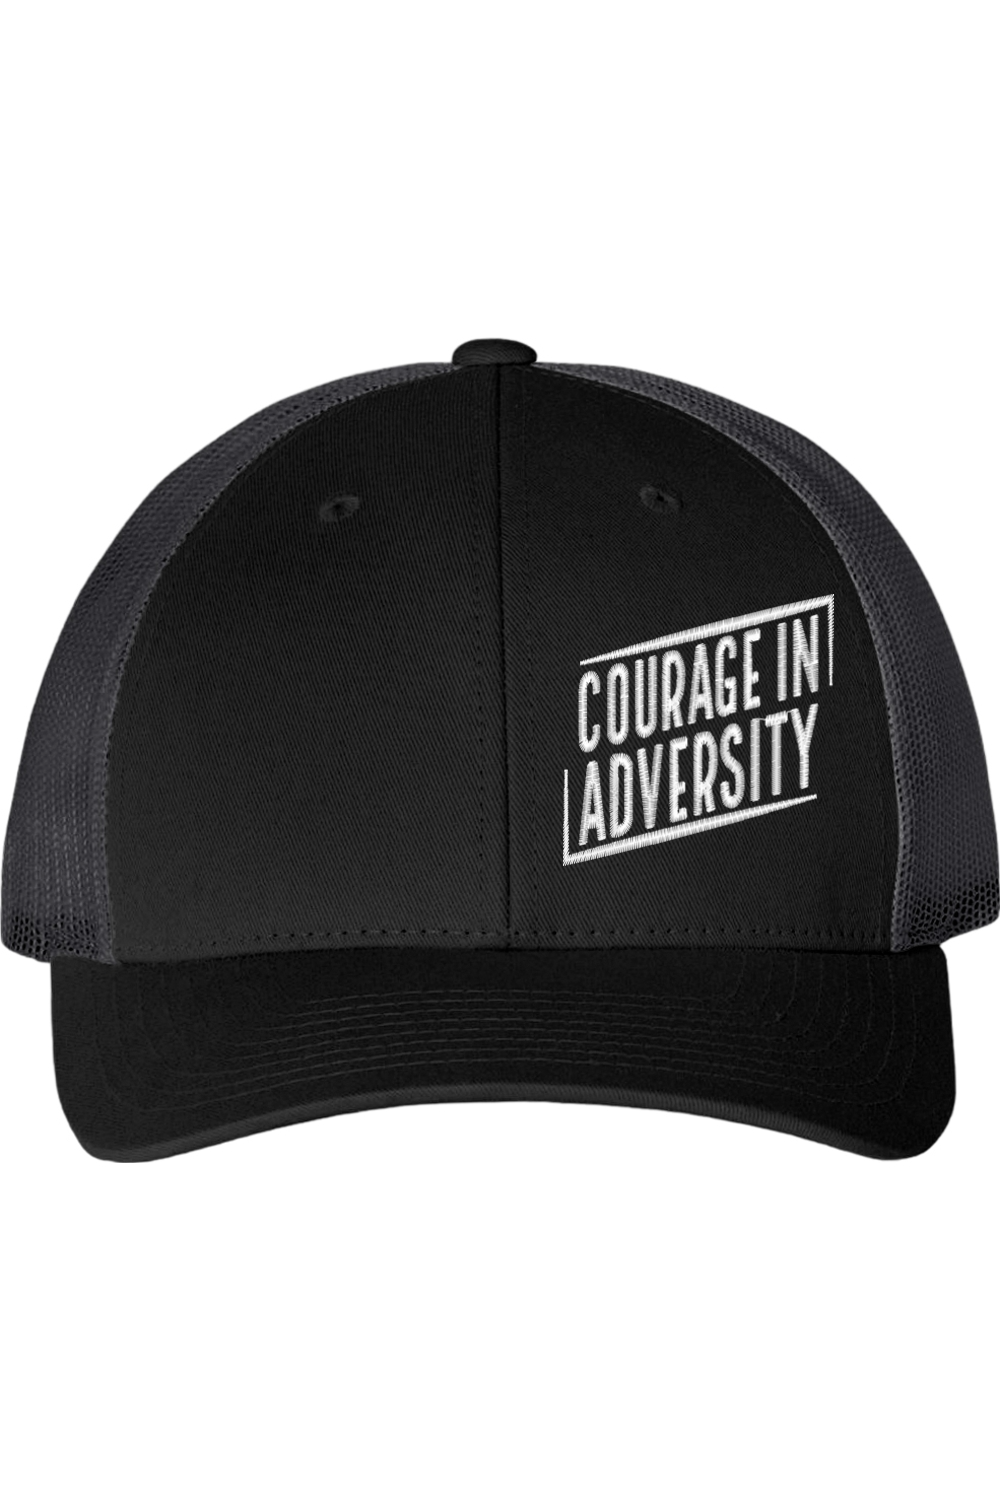 Courage In Adversity Hat